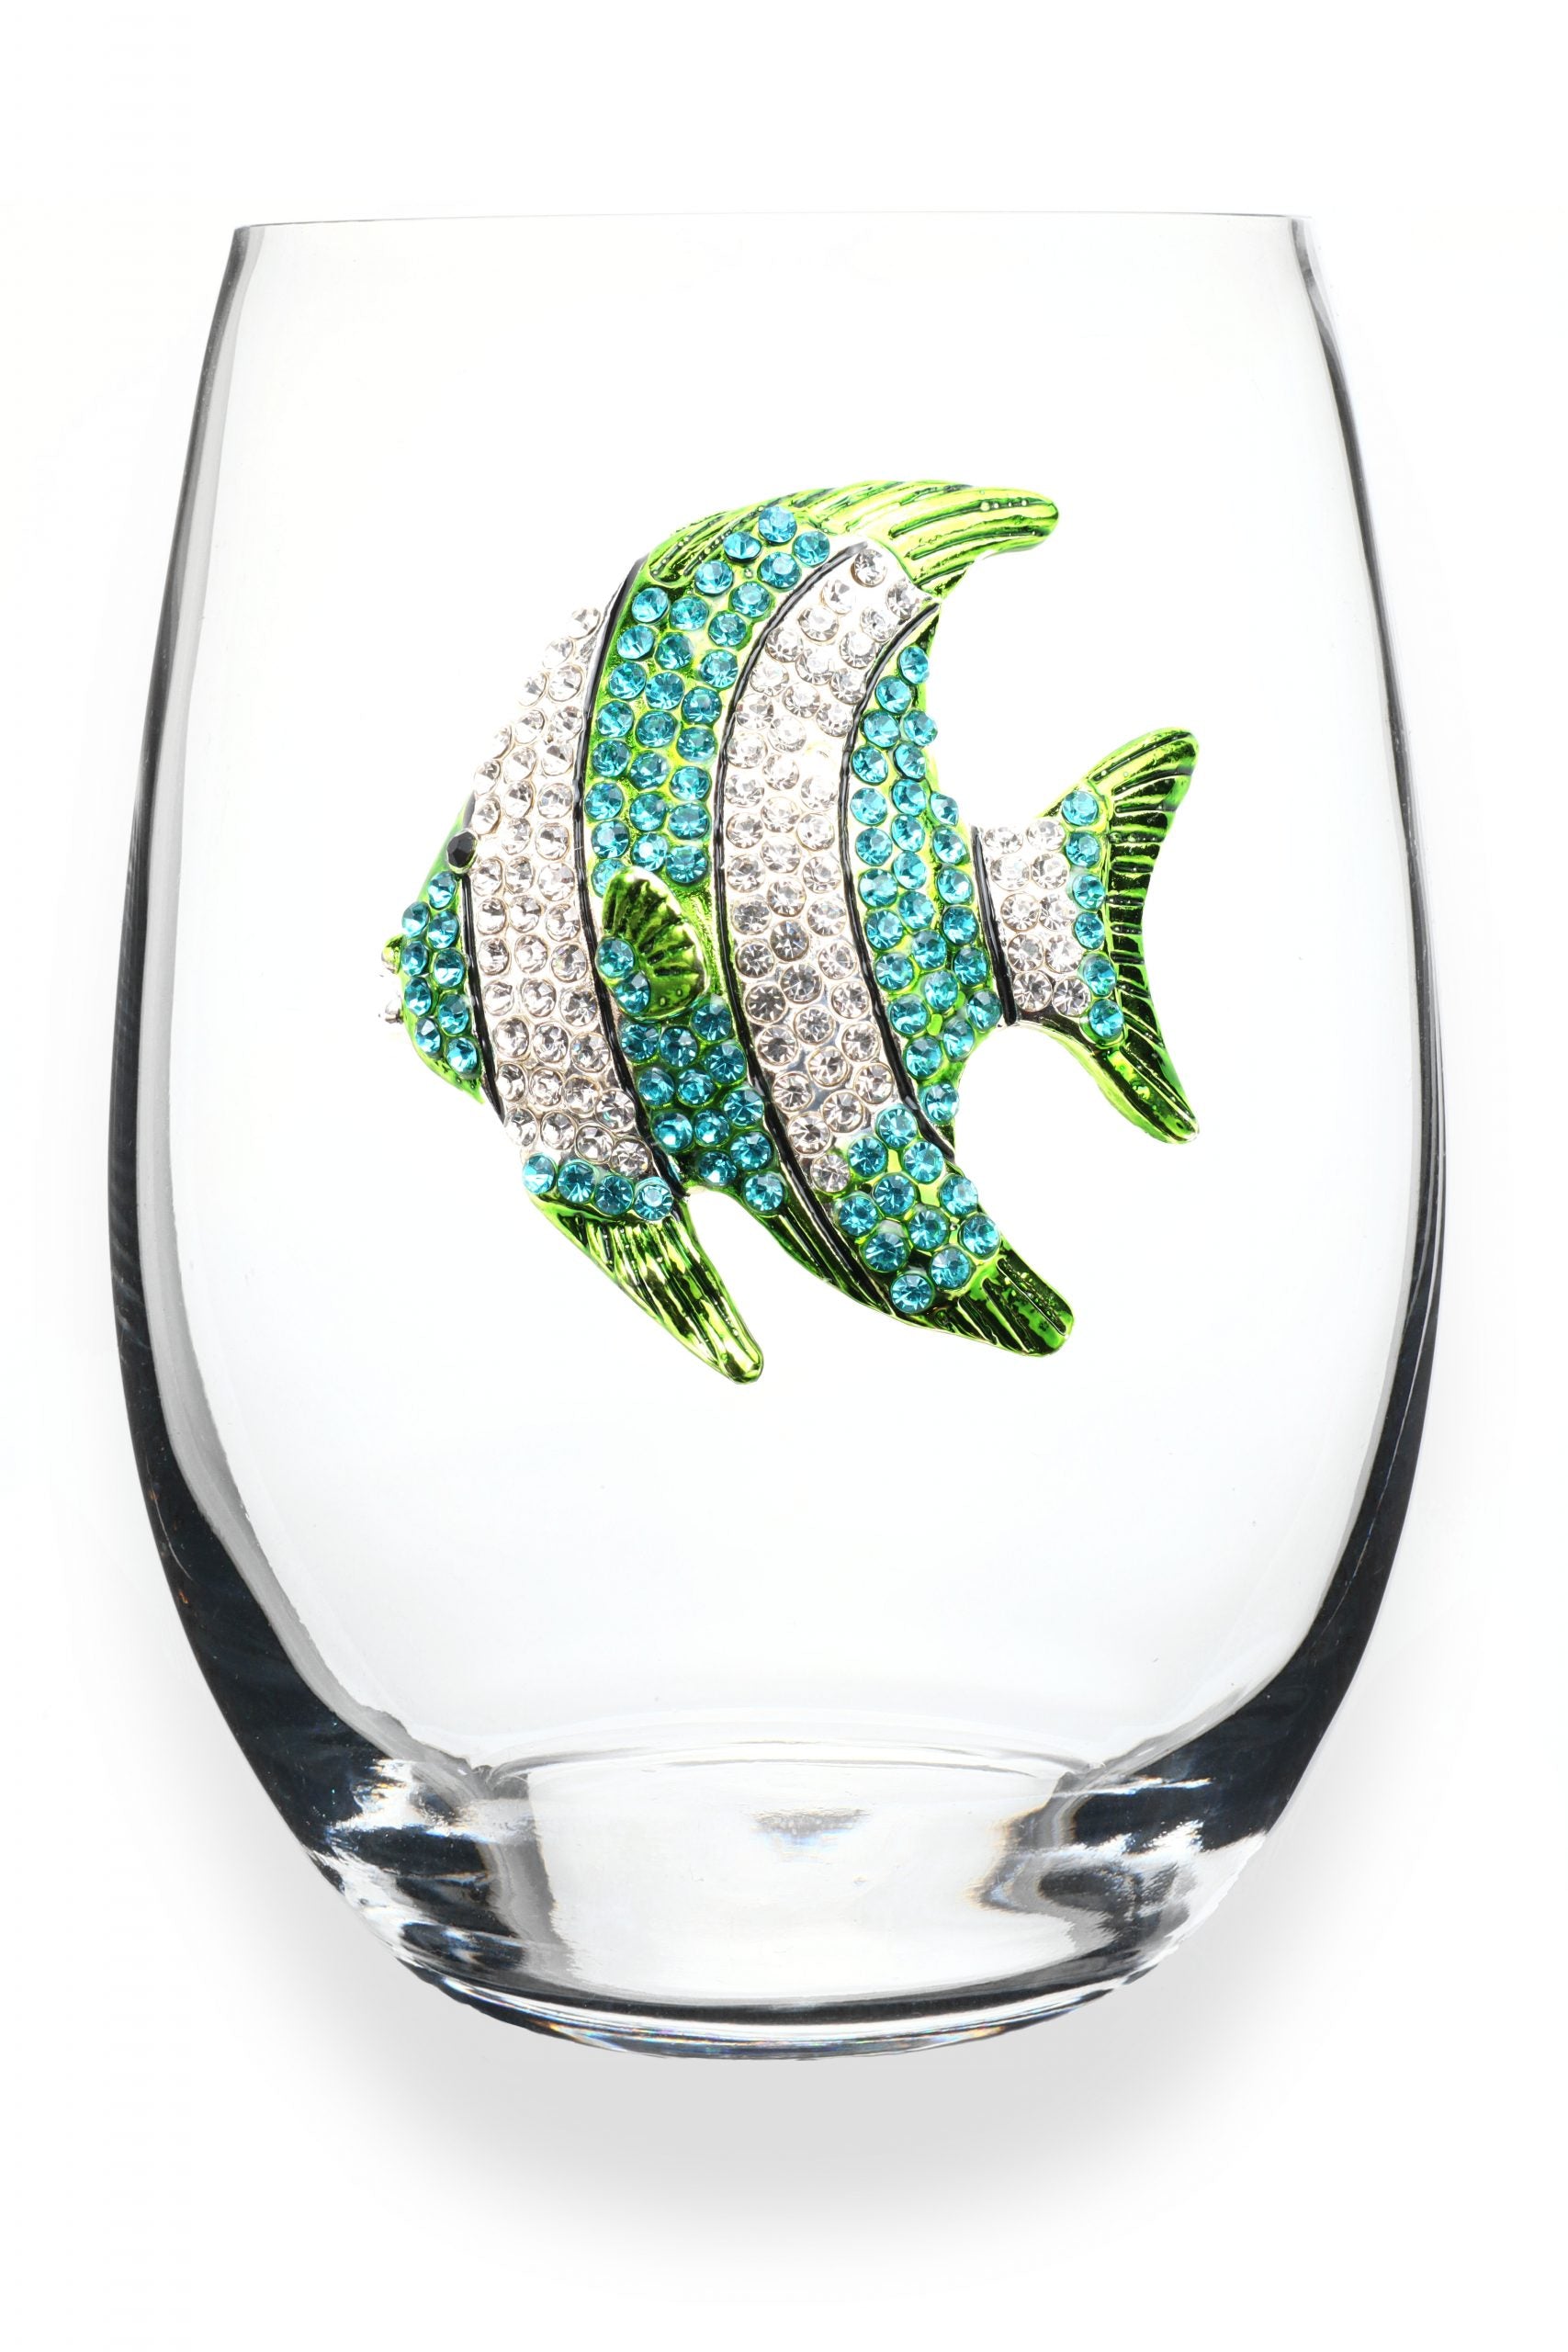 Turquoise Tropical Fish Jeweled Stemless Wine Glass